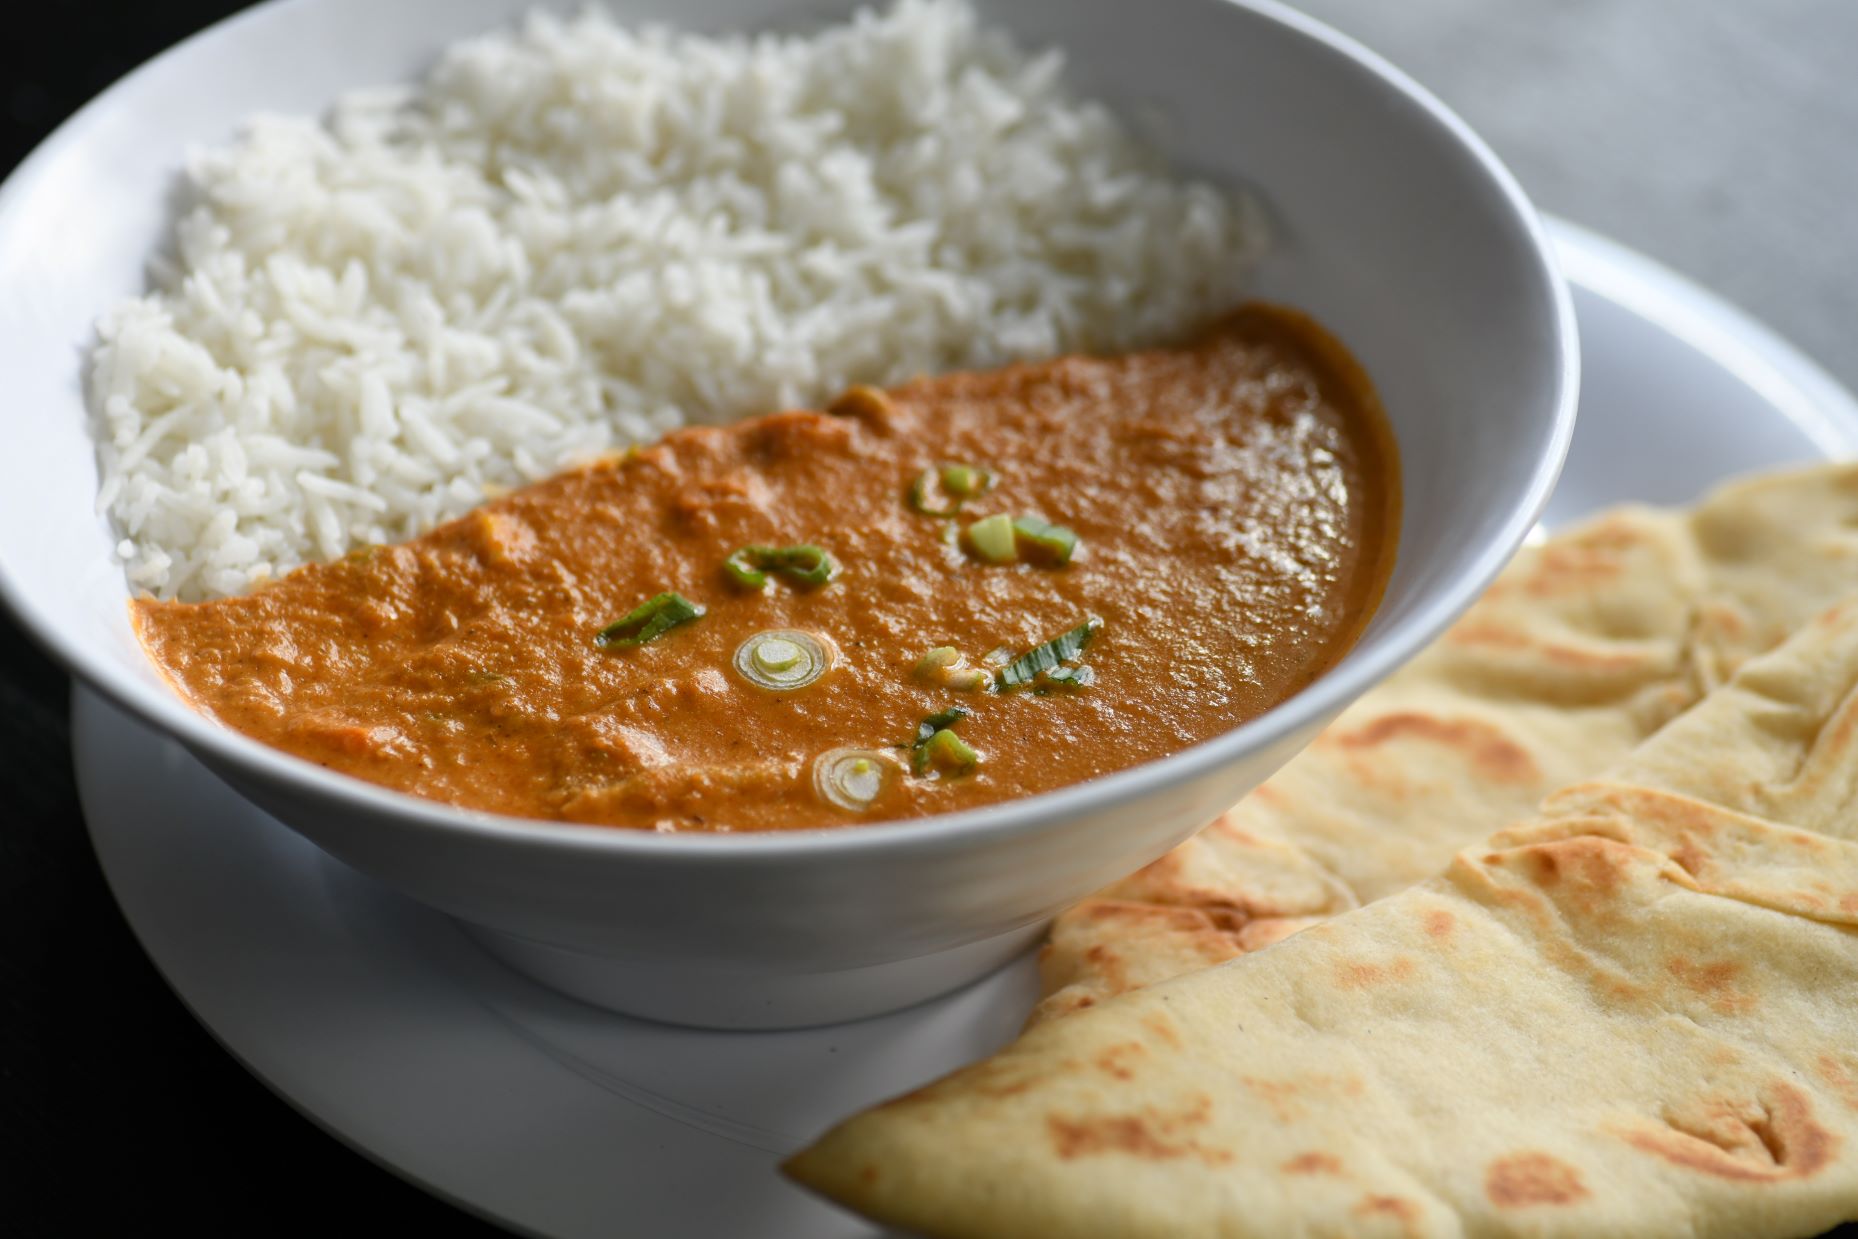 veggie | vegetable curry with rice | naan | bread